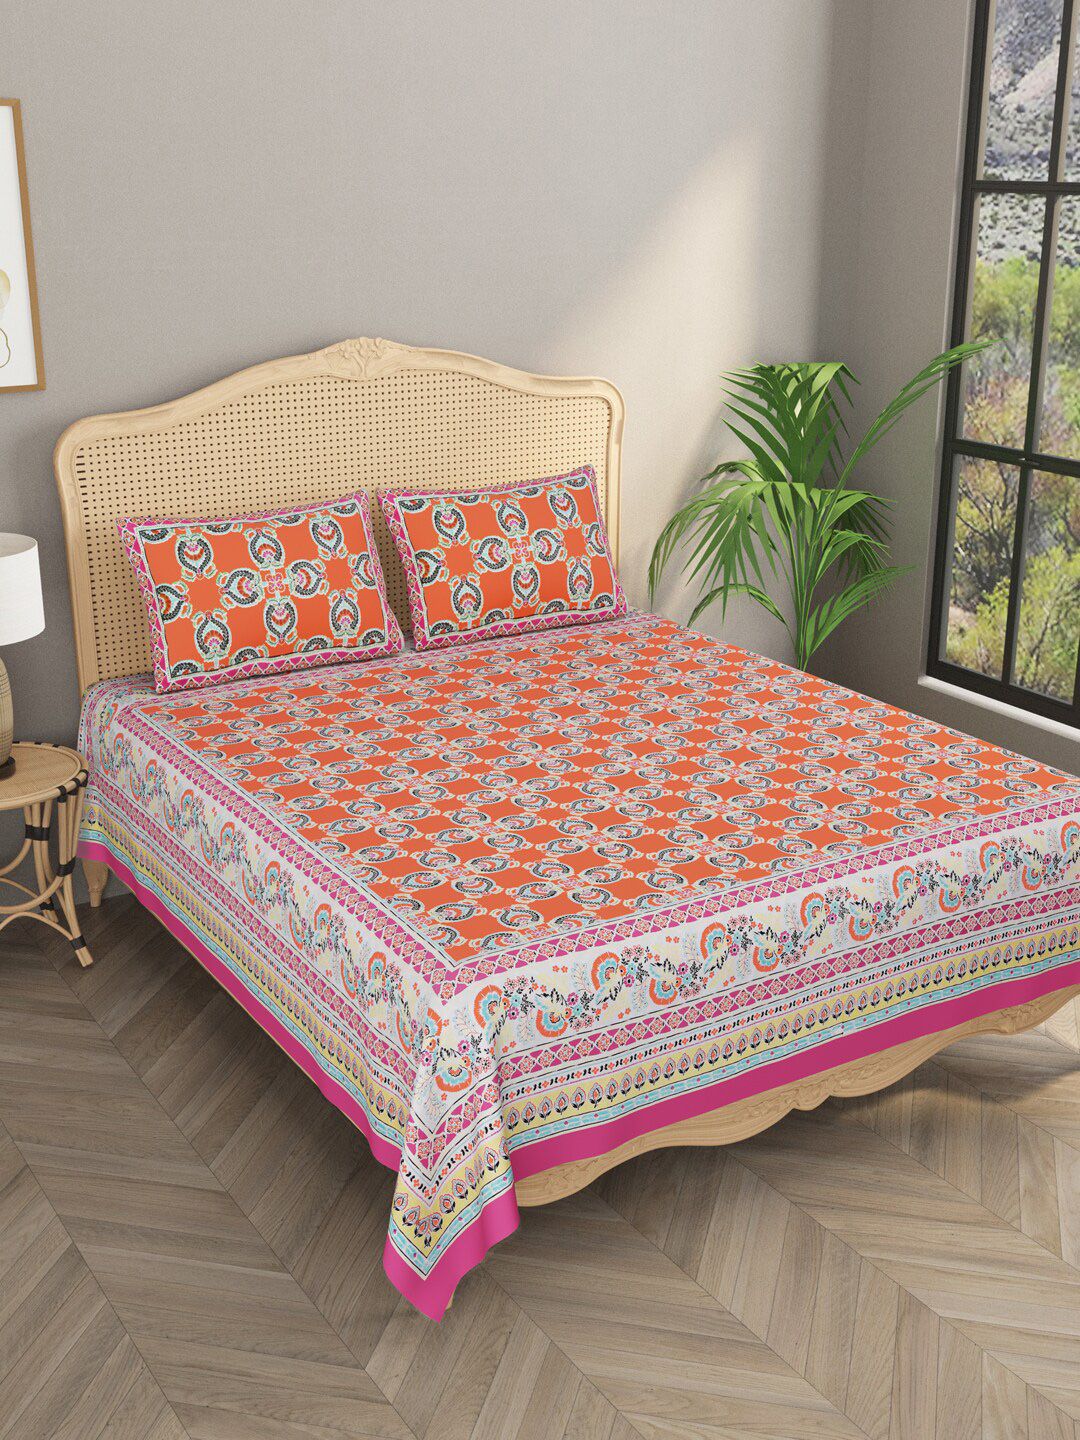 Gulaab Jaipur Orange & Blue Ethnic Motifs Cotton 600 TC King Bedsheet with 2 Pillow Covers Price in India